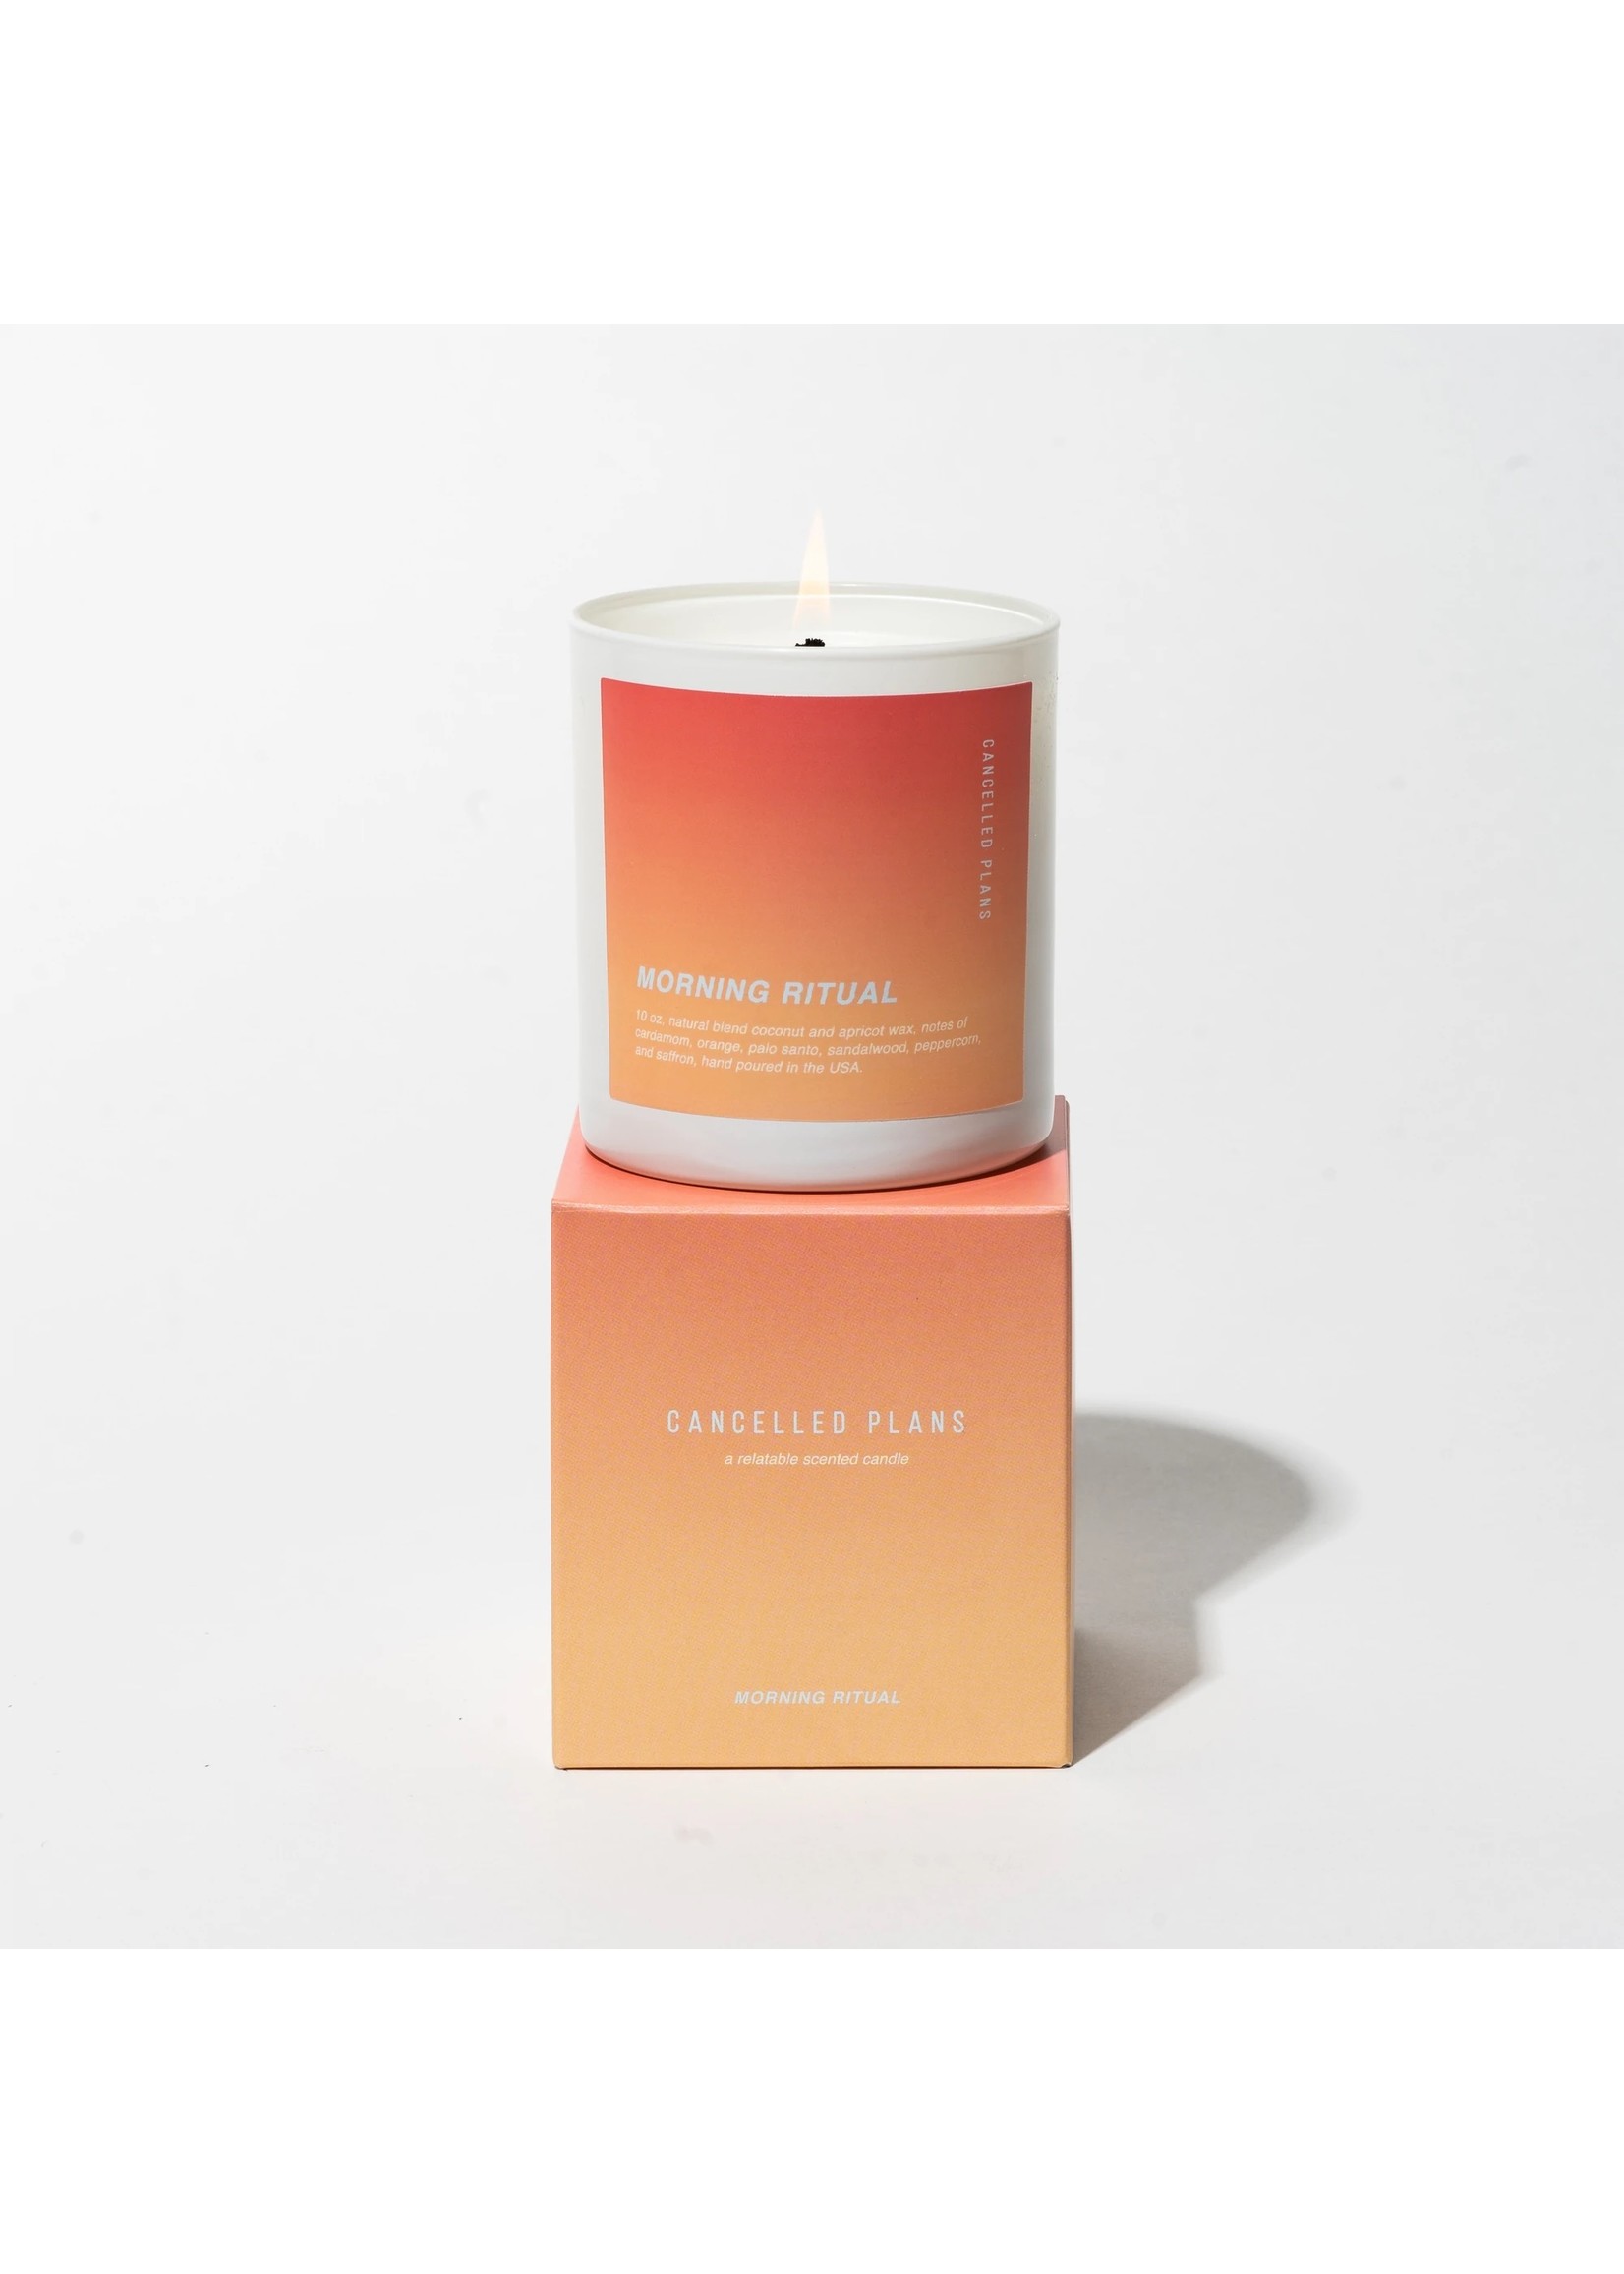 Cancelled Plans Morning Ritual Candle